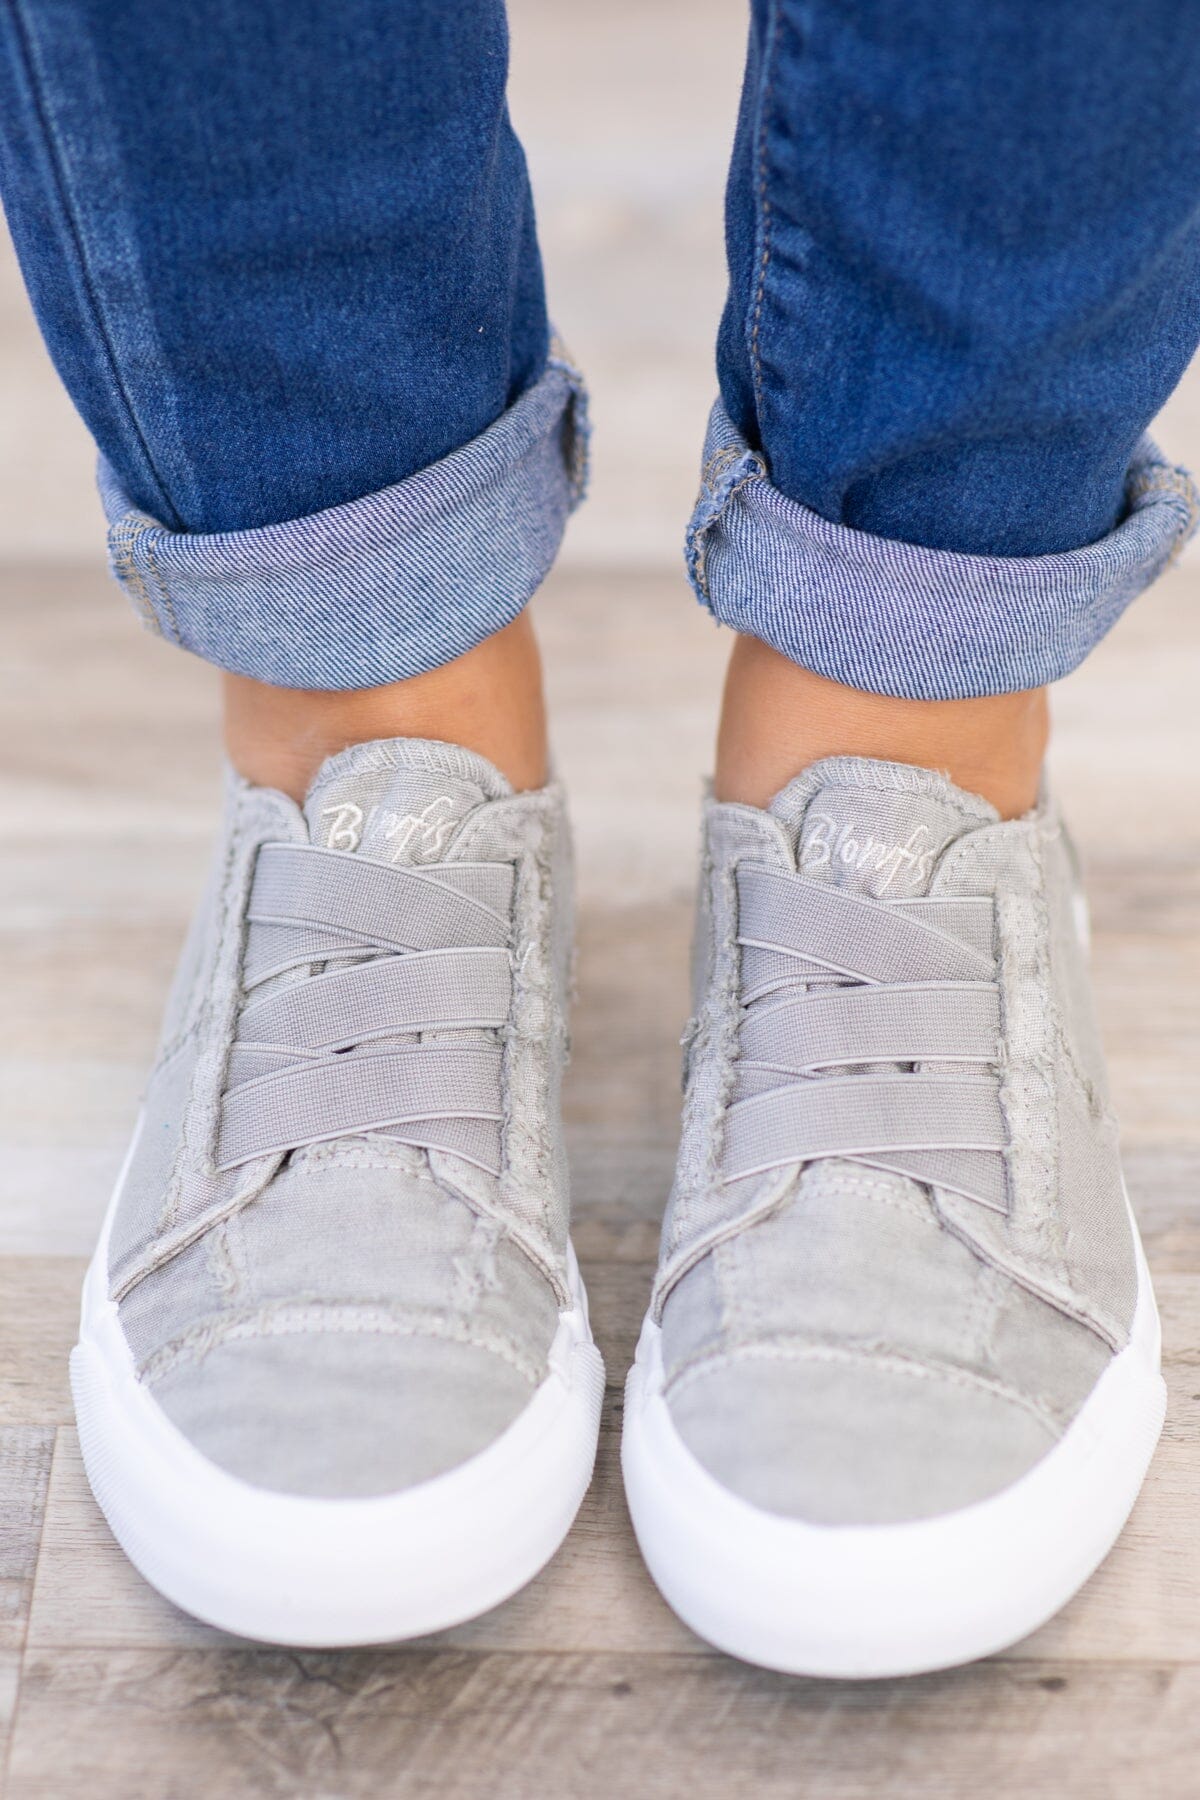 Grey and White Slip On Sneakers - Filly Flair